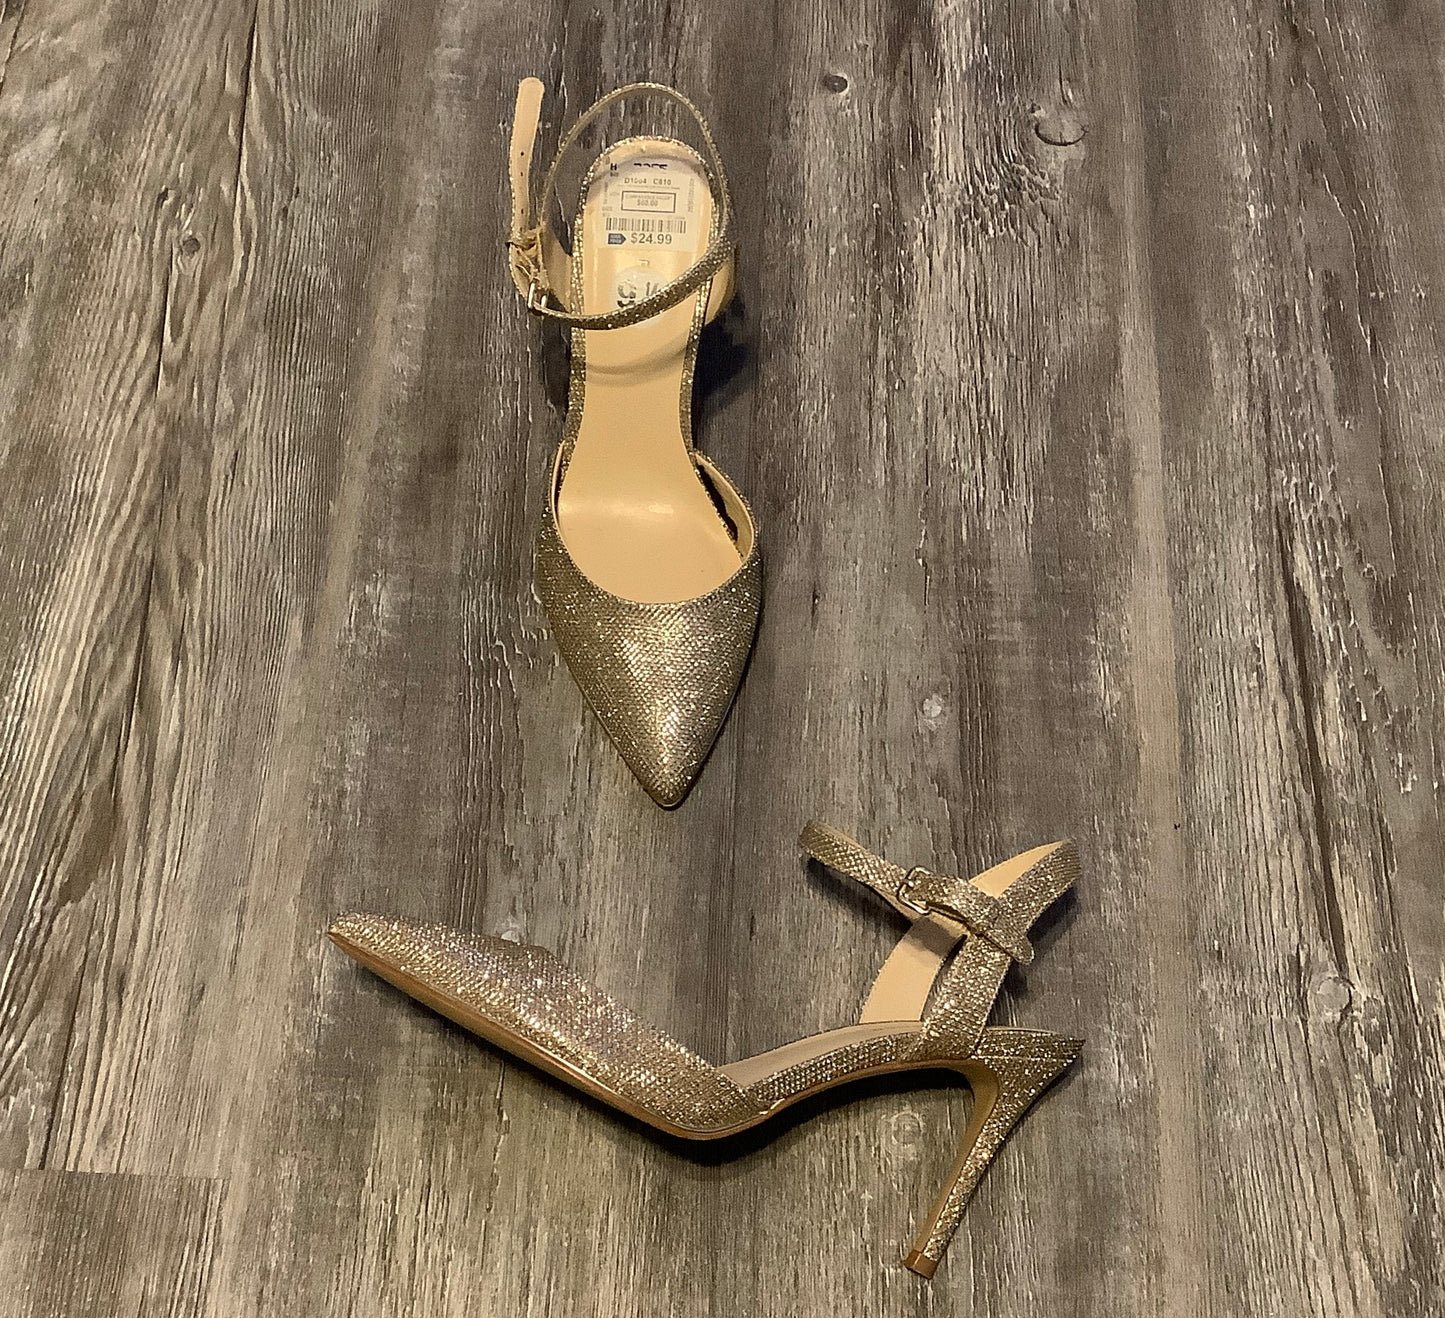 Shoes Heels Stiletto By Marc Fisher  Size: 9.5